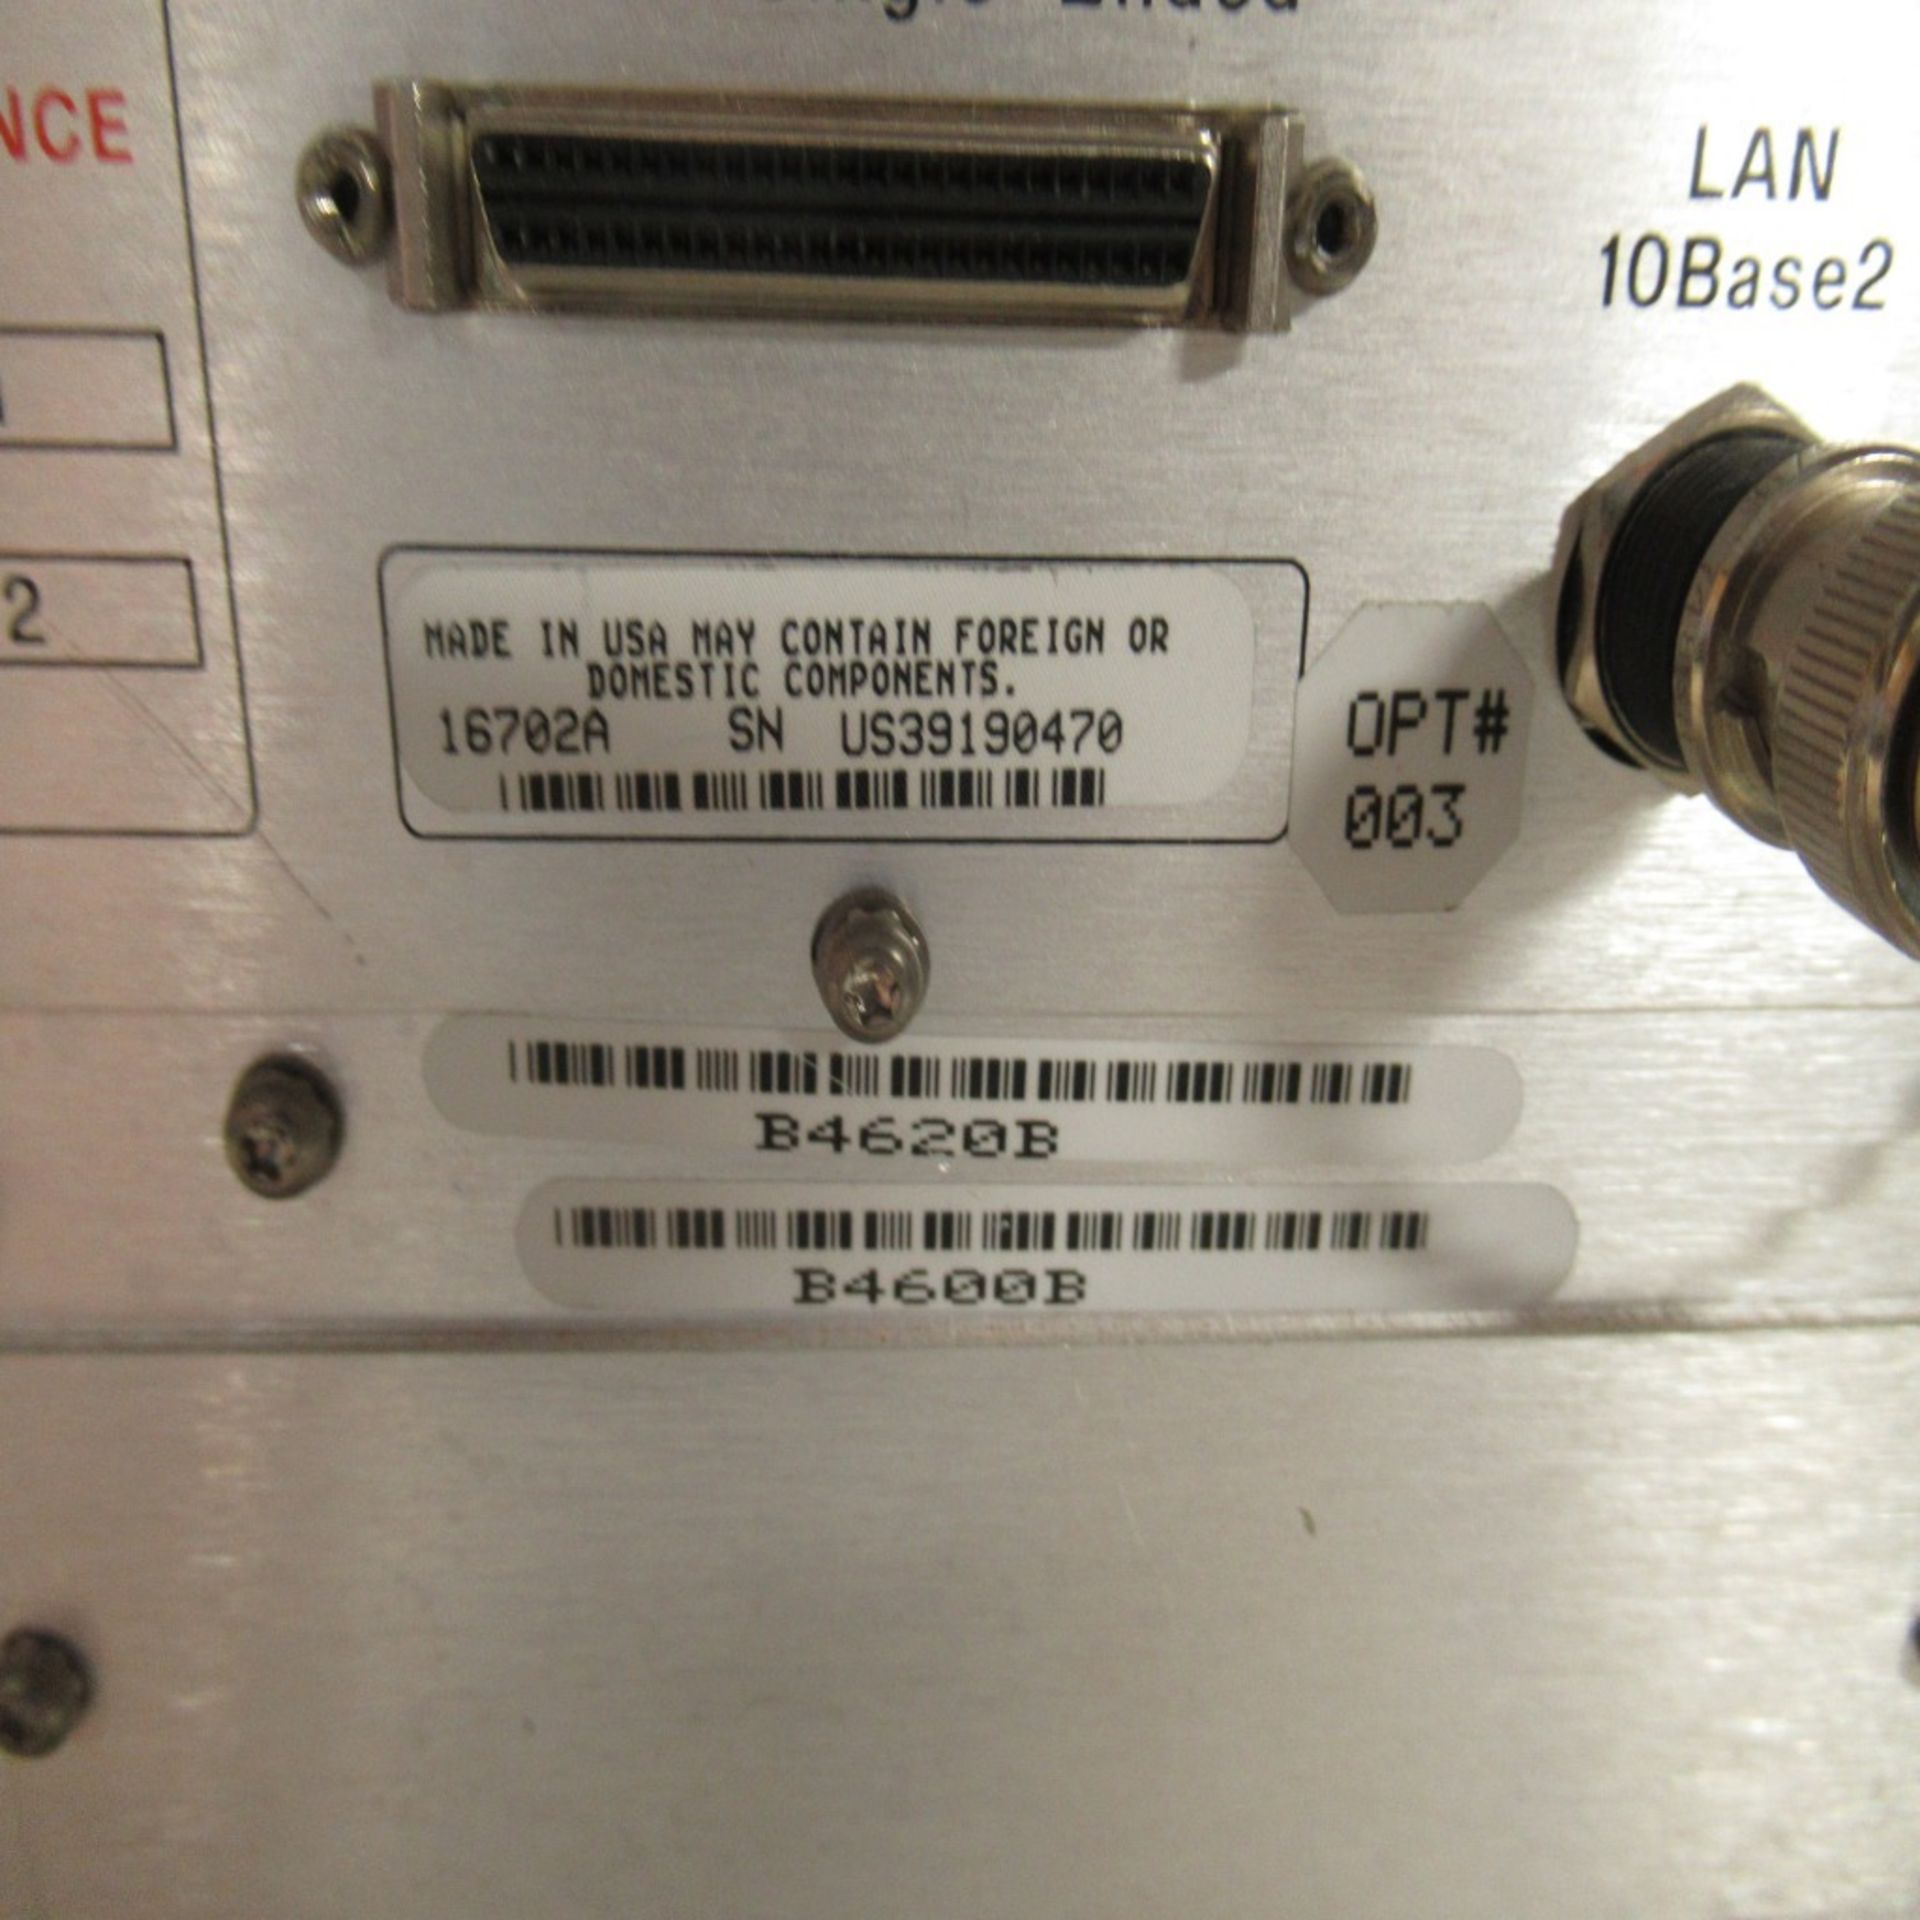 PHOTON SNAP SHOT MODEL 6000 *POWERS ON* NO SCREEN DISPLAY; FARNELL AP20-80 REGULATED POWER SUPPLY * - Image 27 of 222